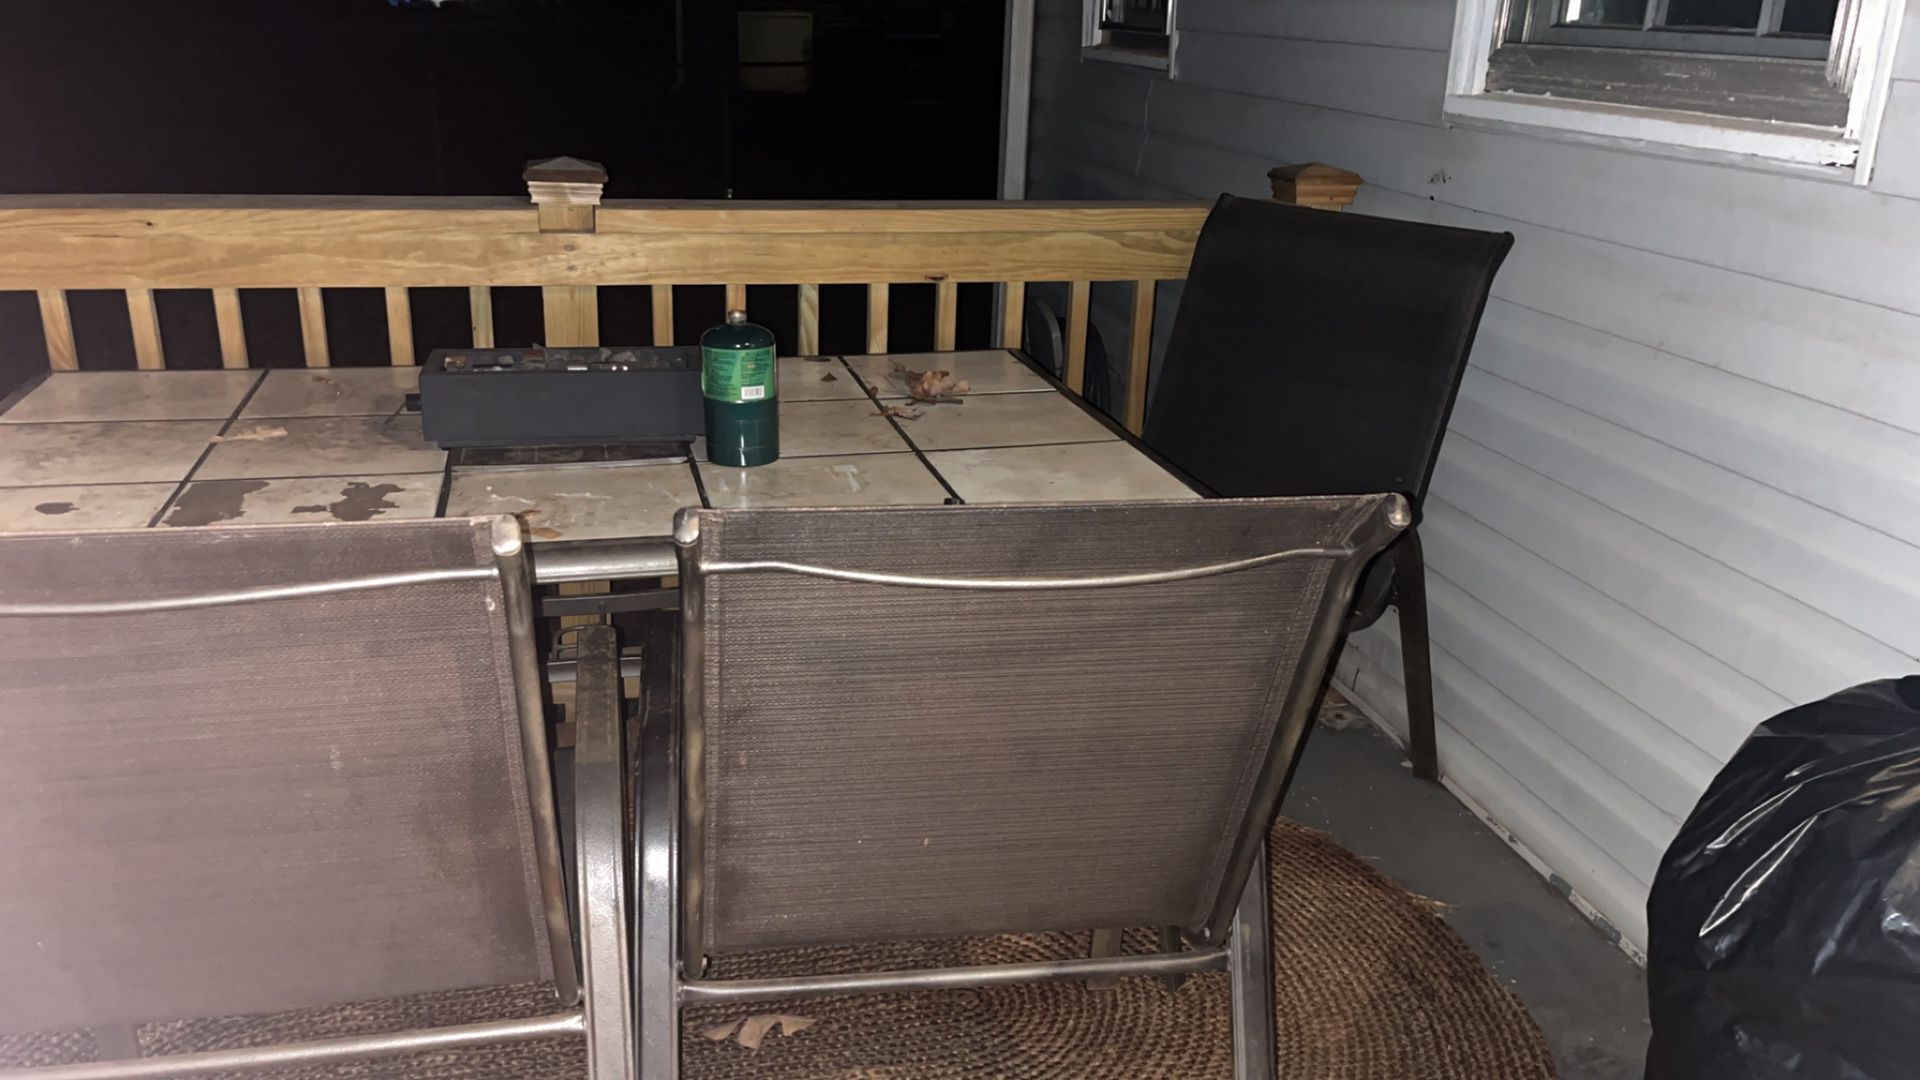 Patio Table With Fire Pit In Middle 